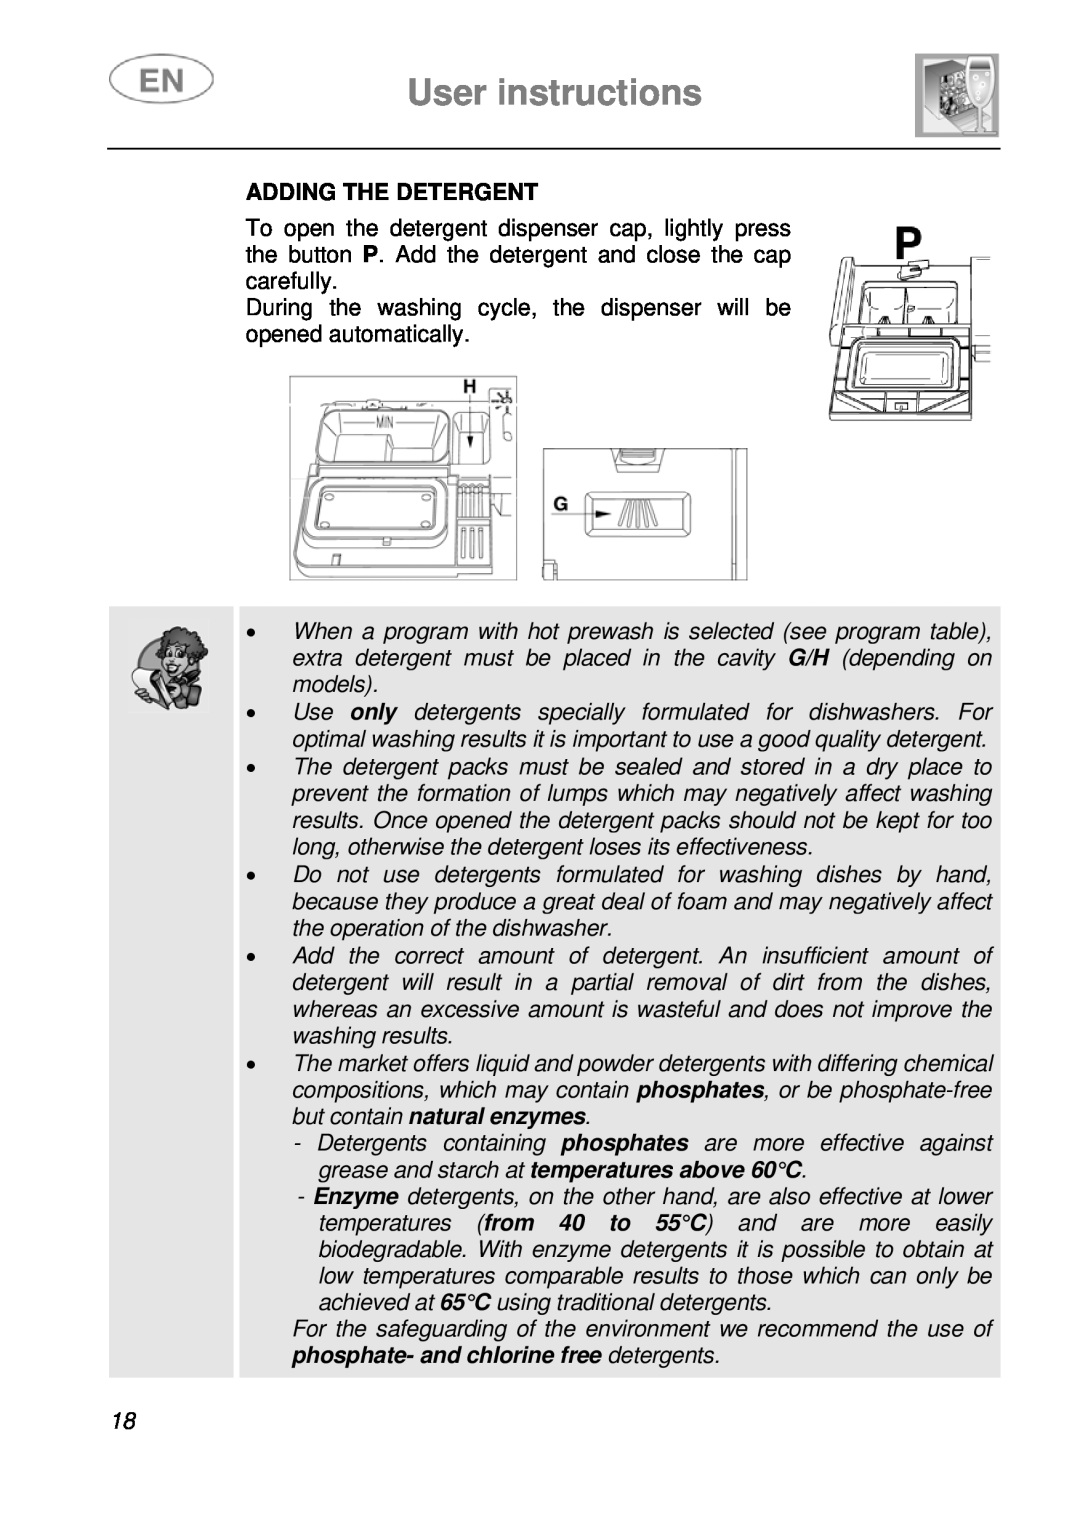 CDA WC460 manual User instructions, Adding The Detergent 